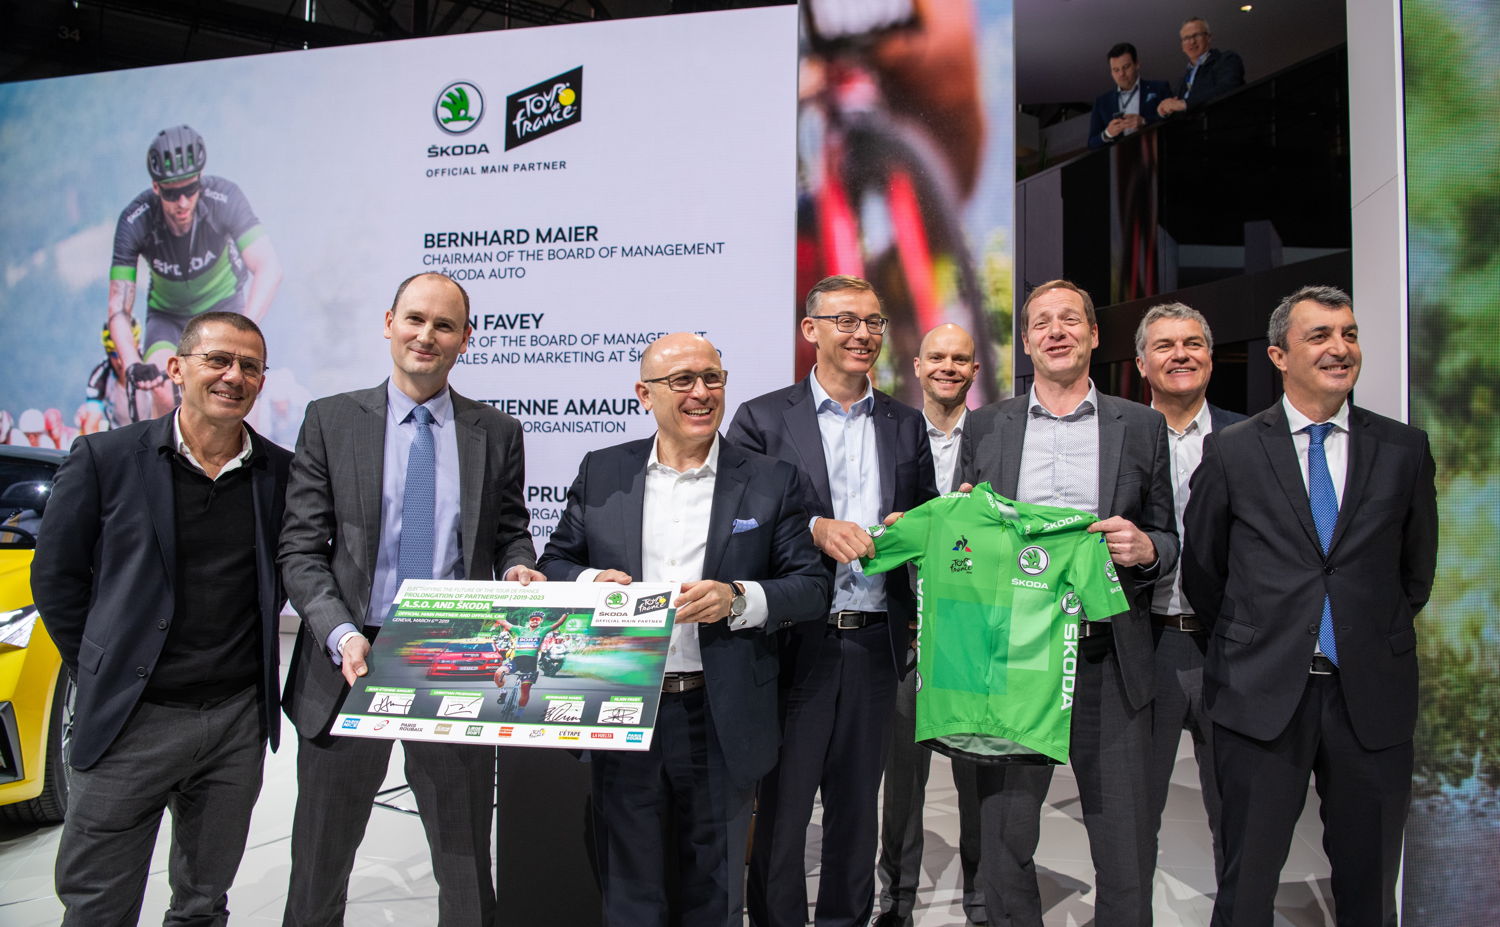 The agreement to extend the partnership was signed in Geneva today by Bernhard Maier (third from left), ŠKODA AUTO CEO, Alain Favey (fourth from left), ŠKODA AUTO Board Member for Sales and Marketing, Jean Étienne Amaury (second from left), A.S.O. President and Christian Prudhomme (third from right), director of the Tour de France.